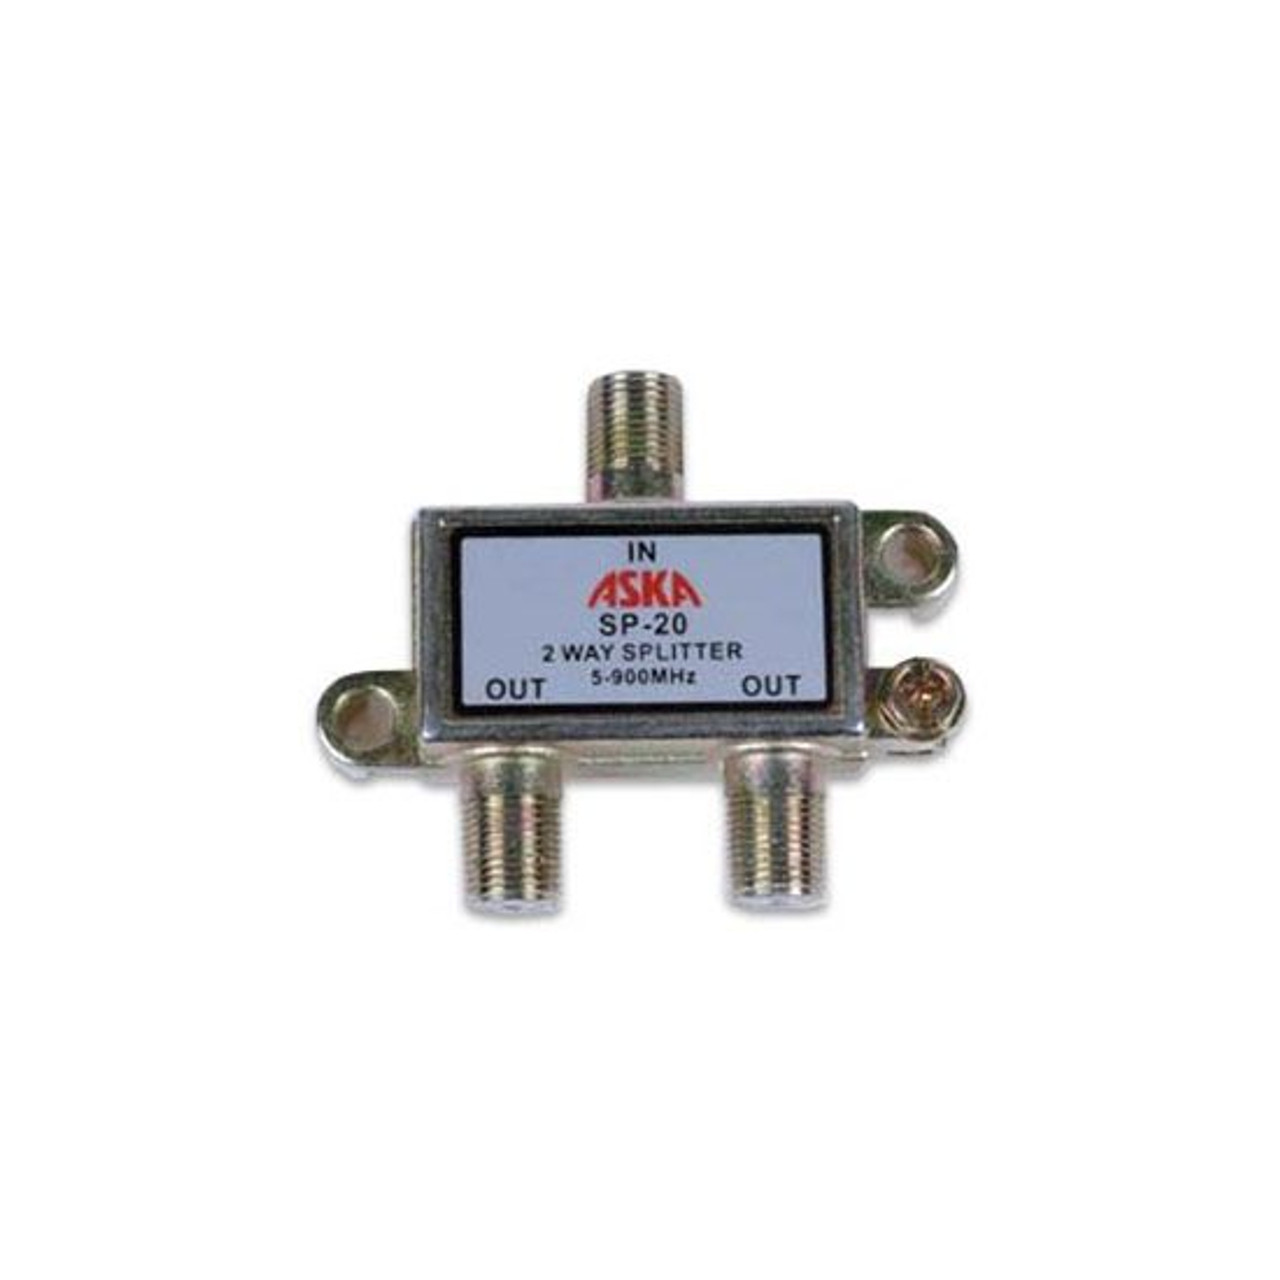 Axis RSE-A102G 5-900 MHz 2 Way Splitter MATV Cable TV F Coupler Female to Female TV/MATV/FM 2 Way Splitter 1 Pack 75 Ohm Coaxial Cable Connection Video Combiner for TV Aerial Antenna, Part # RSEA102G